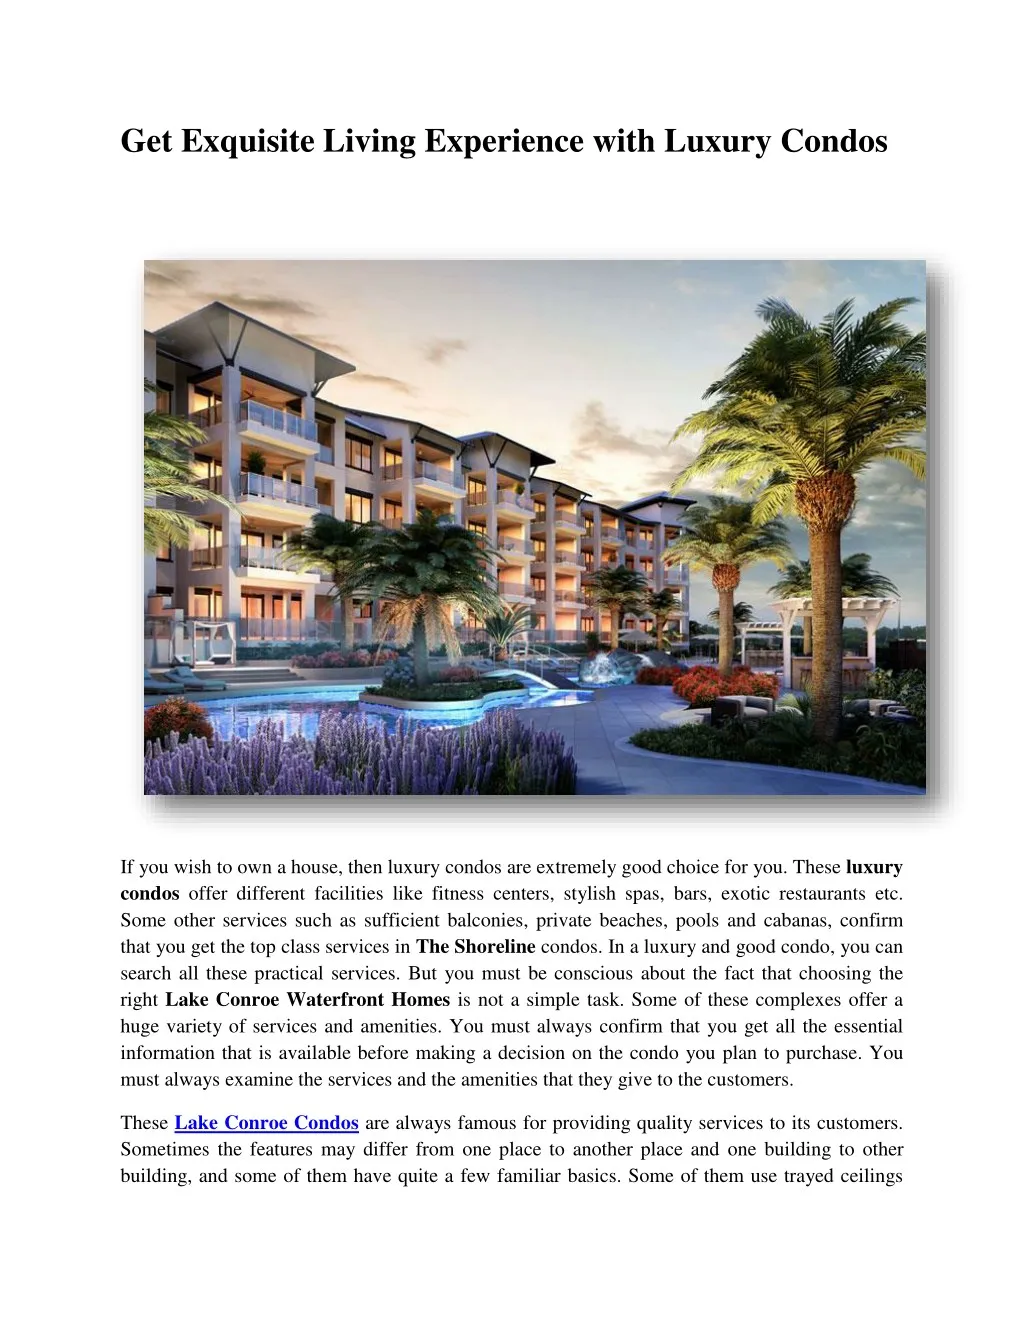 get exquisite living experience with luxury condos